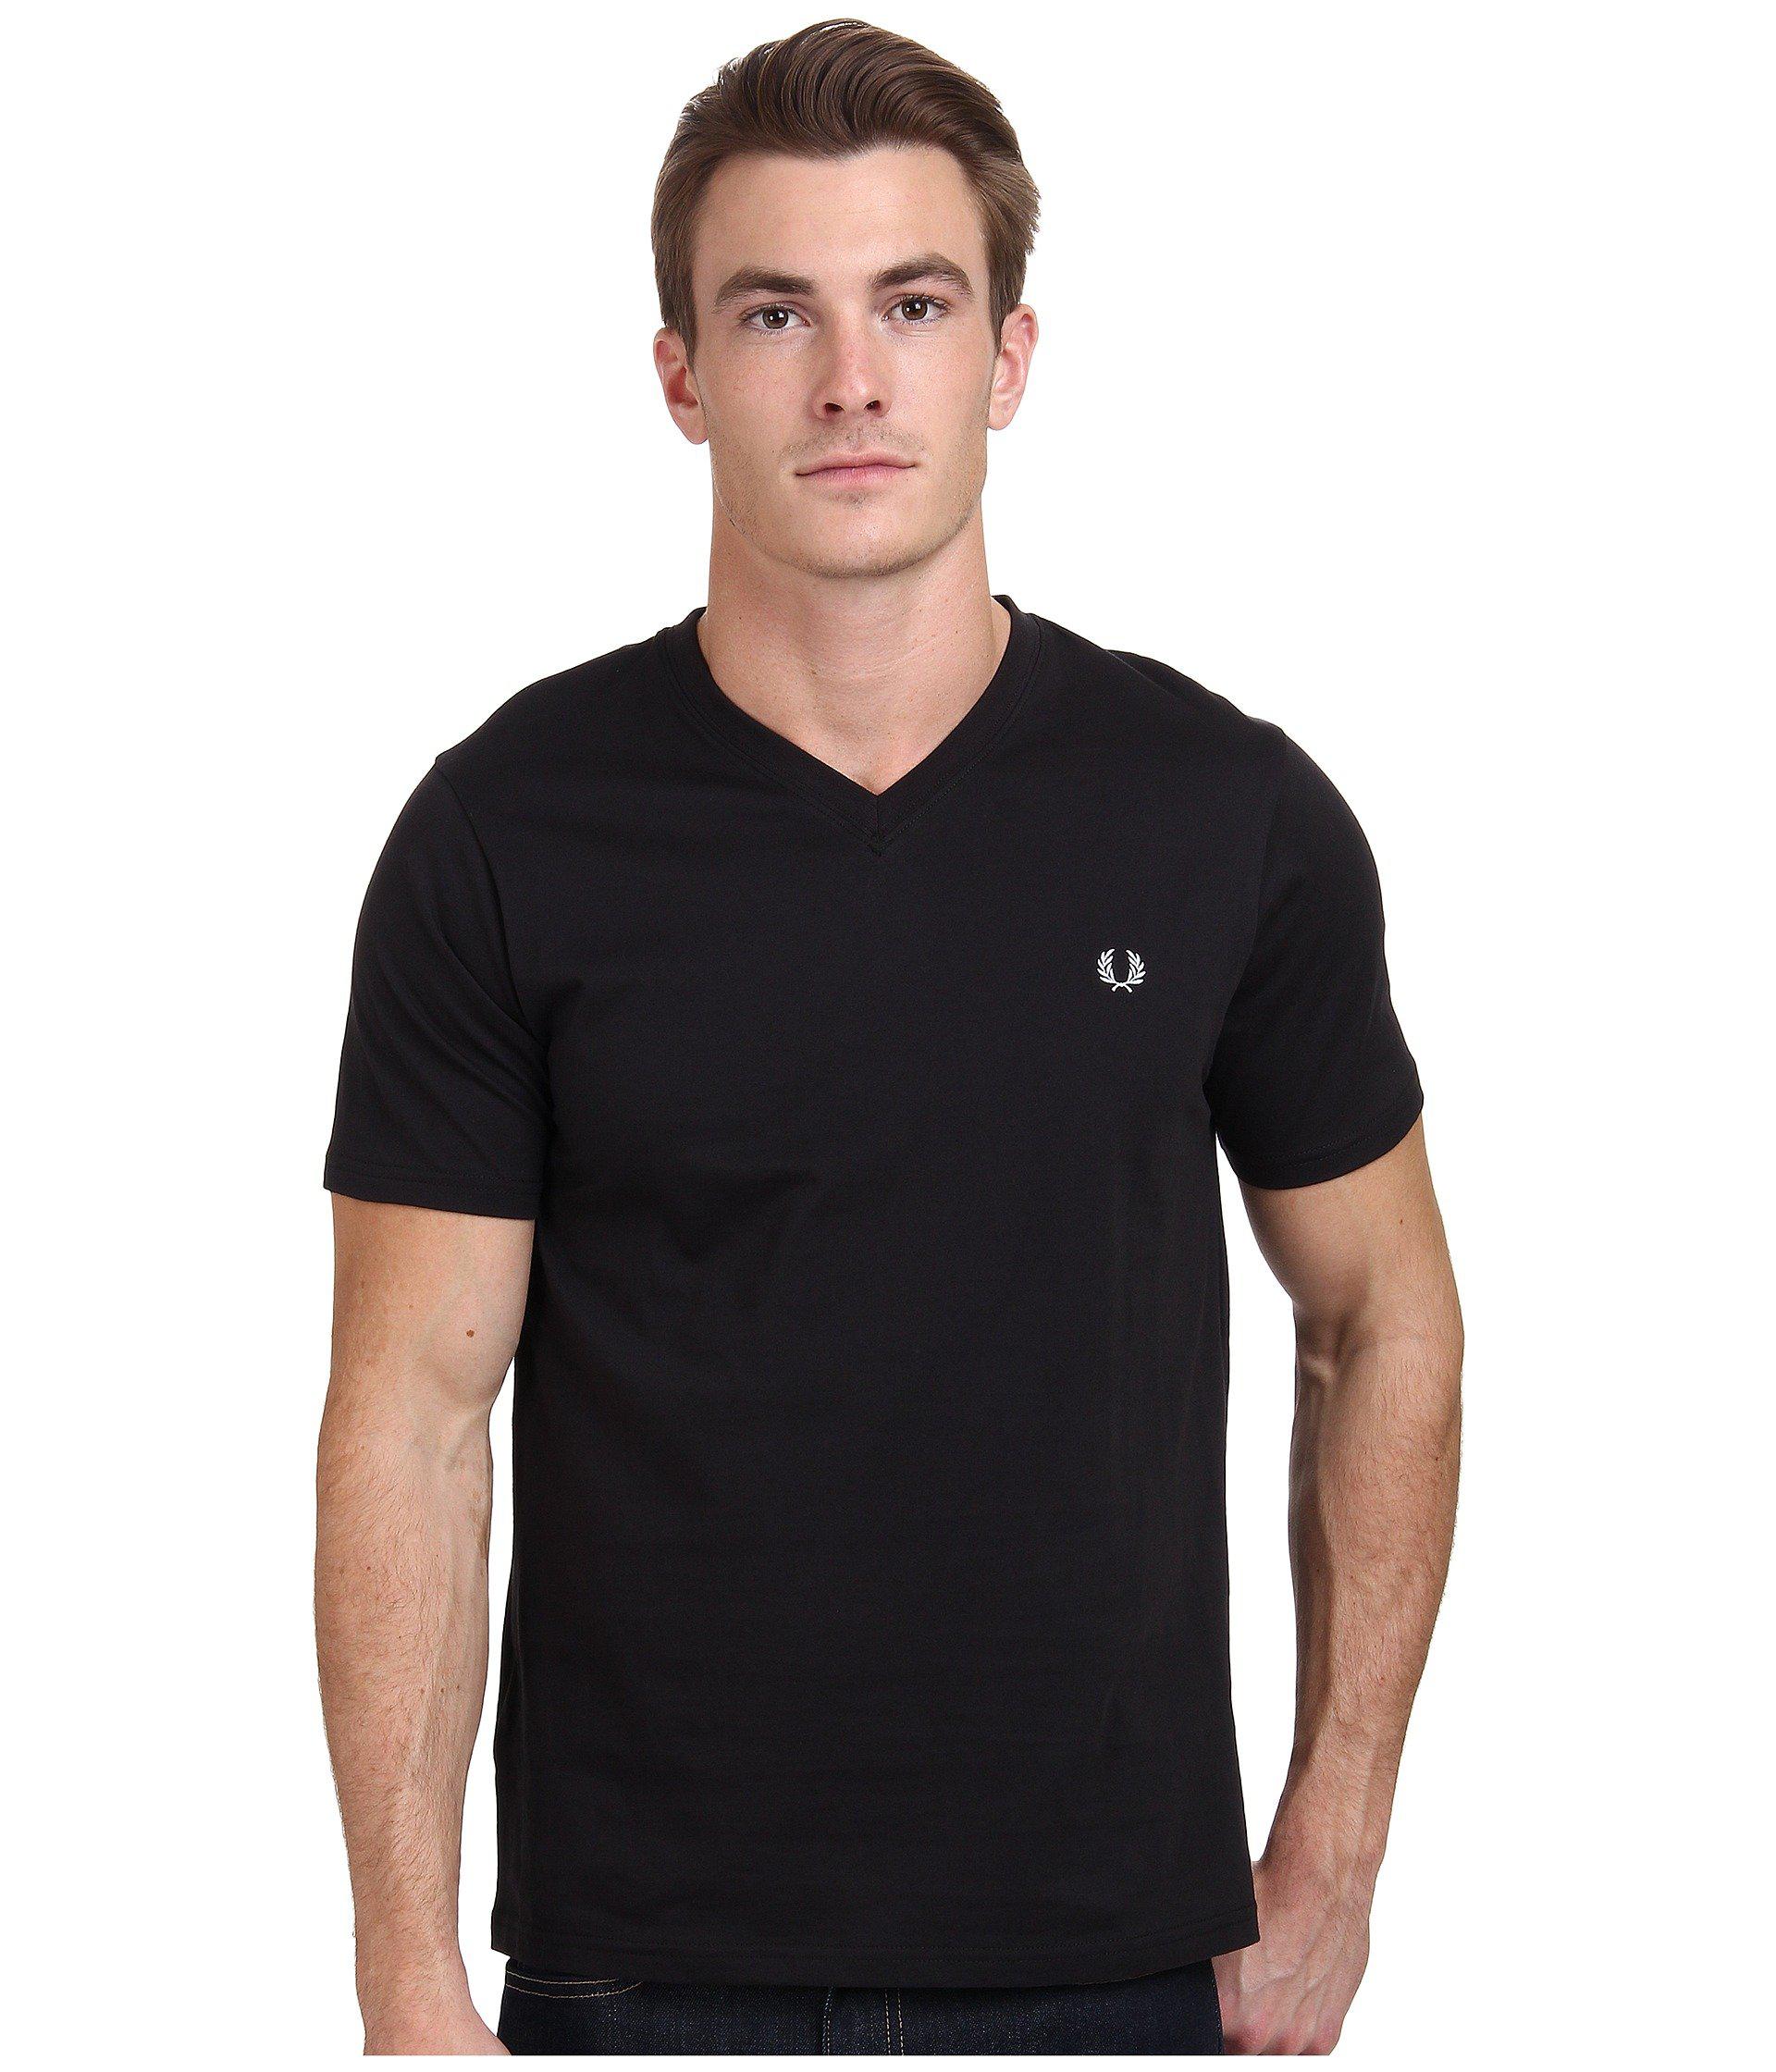 Fred Perry V-neck T-shirt in Black for Men - Lyst